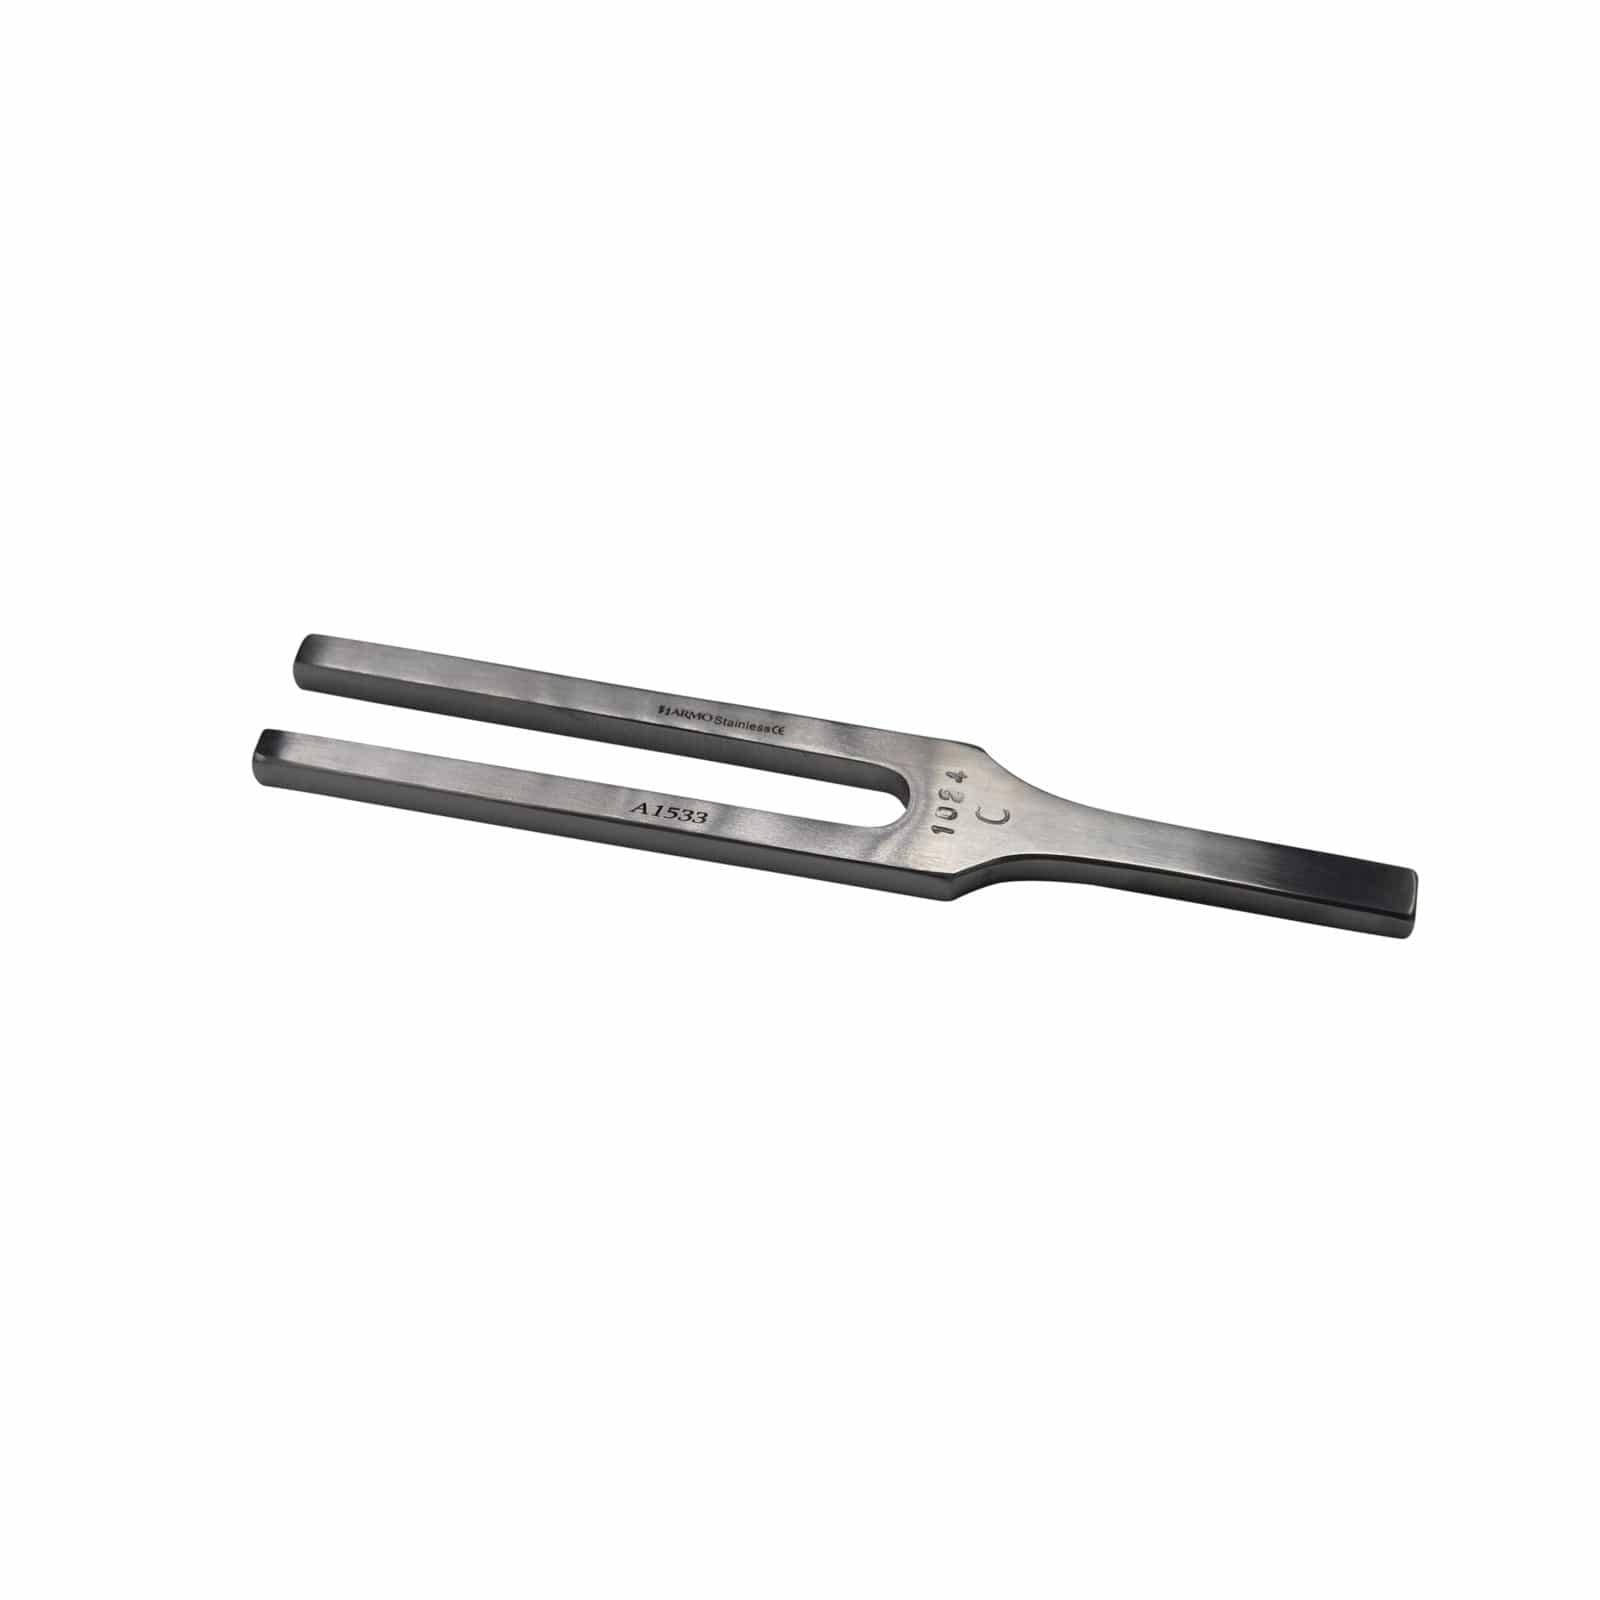 Armo Surgical Instruments C1024 Armo Tuning Fork Stainless Steel